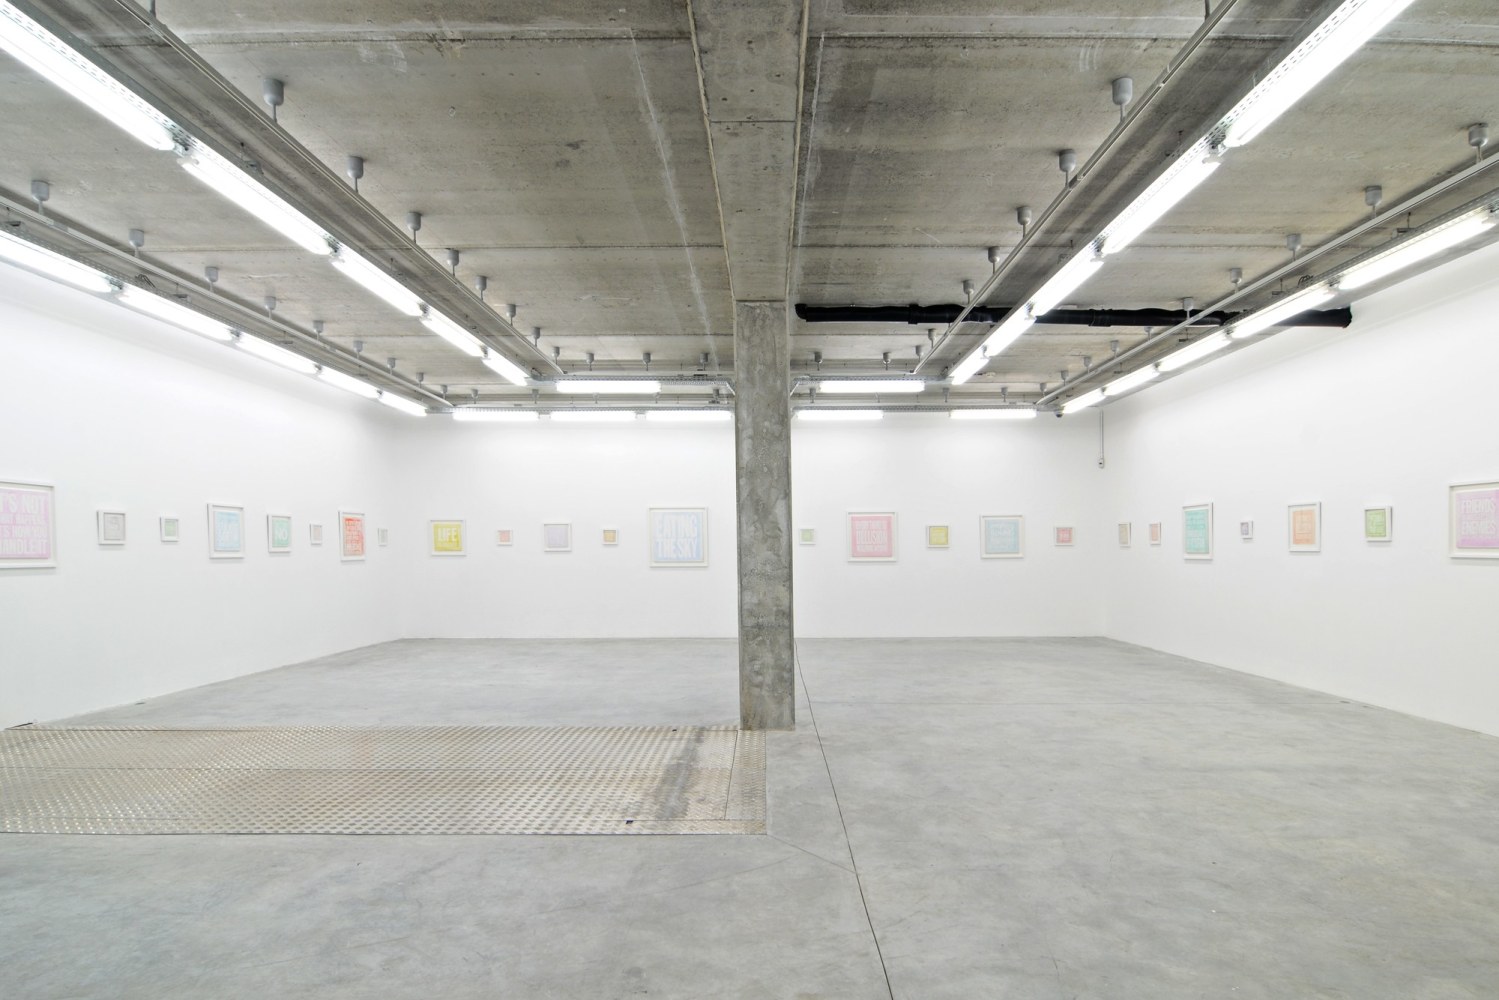 Installation view of&amp;nbsp;Eating the Sky&amp;nbsp;at Almine Rech Gallery, Brussels, 2010